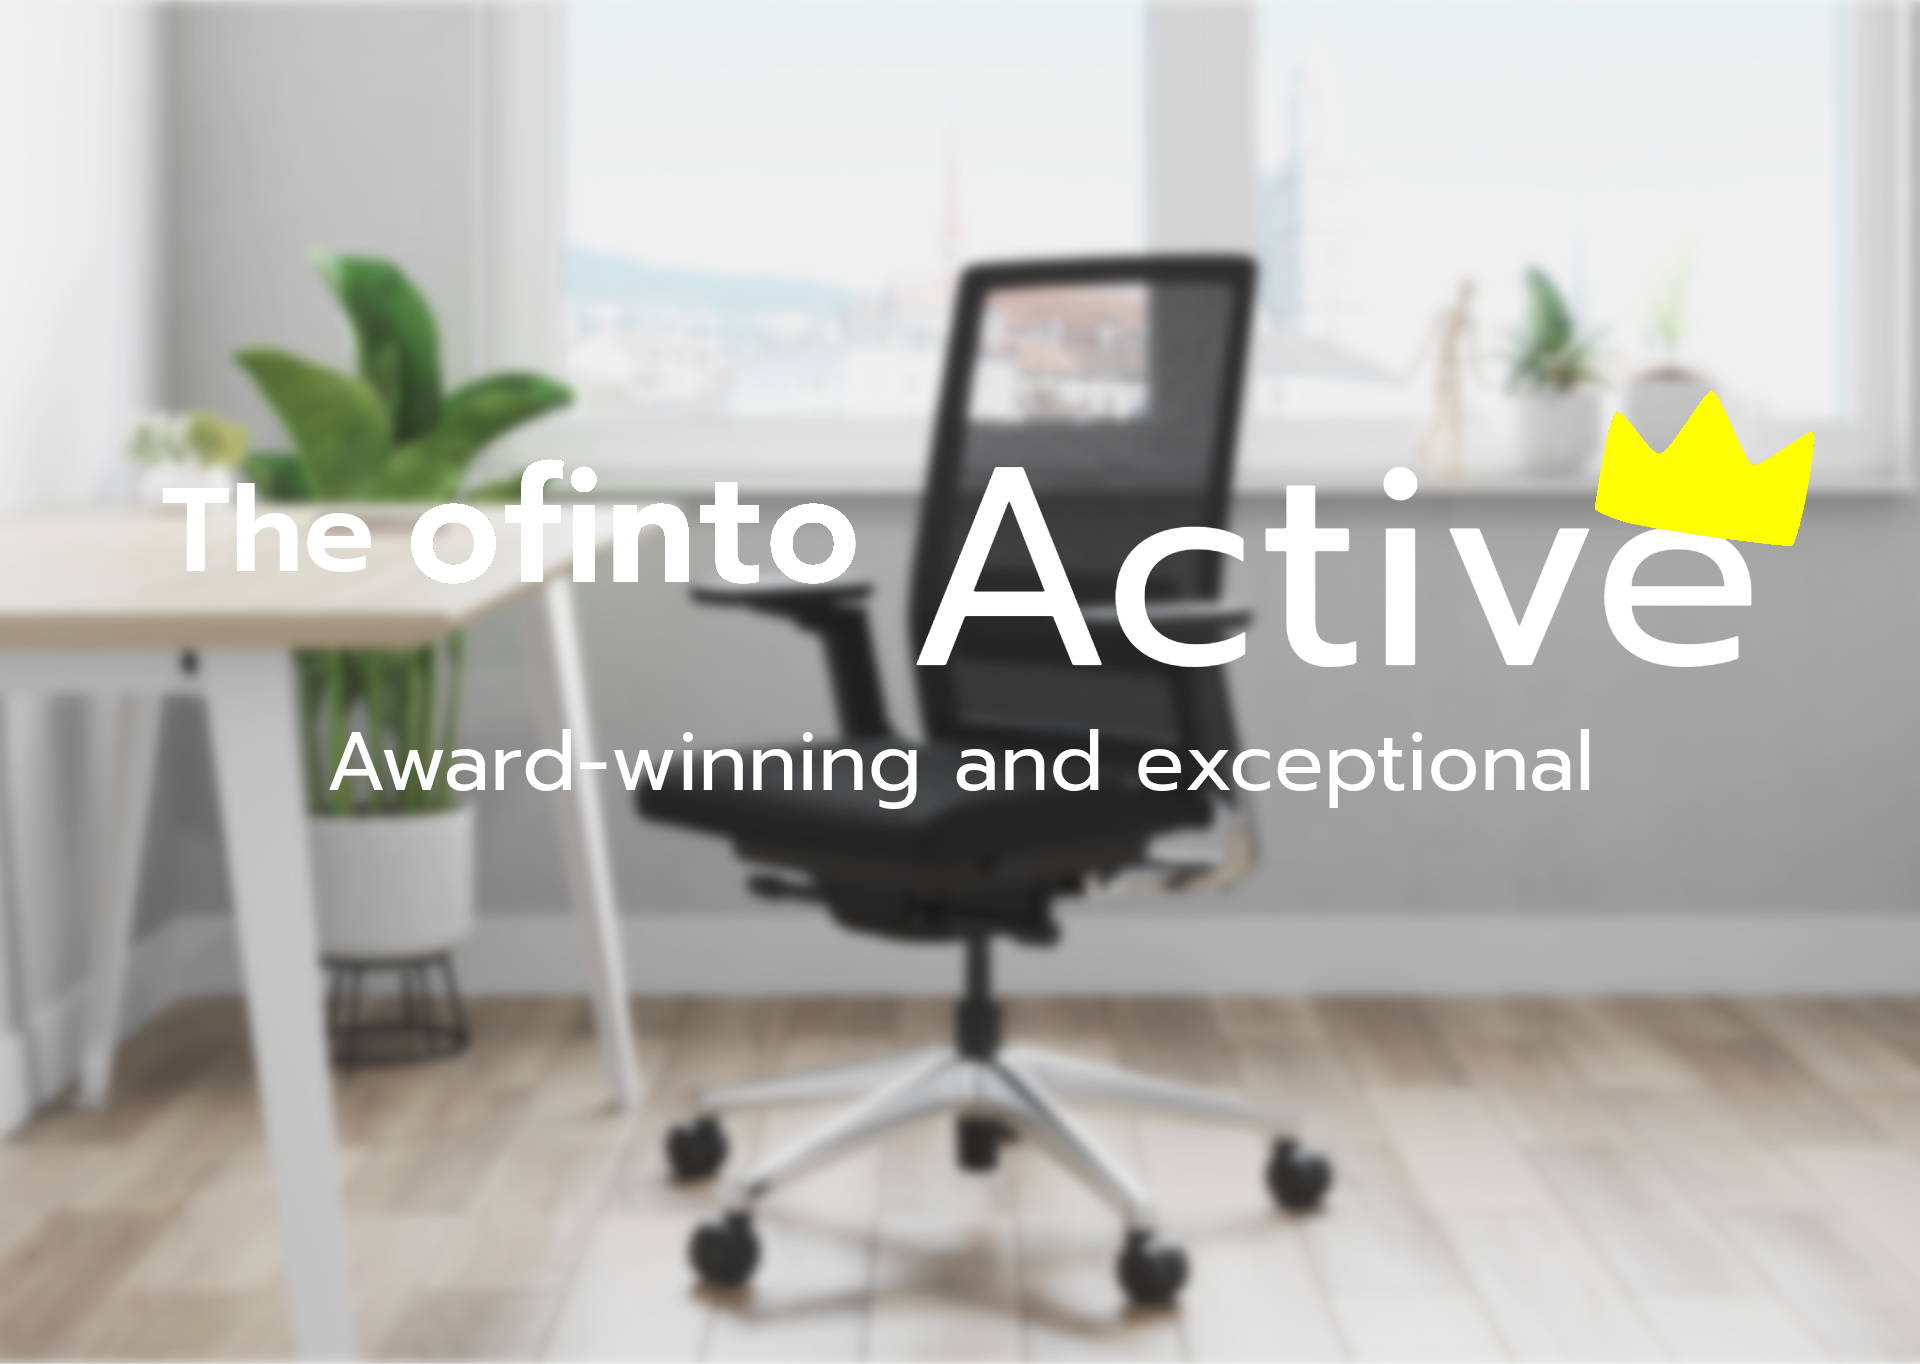 Award-winning and excellent: The ofinto Active